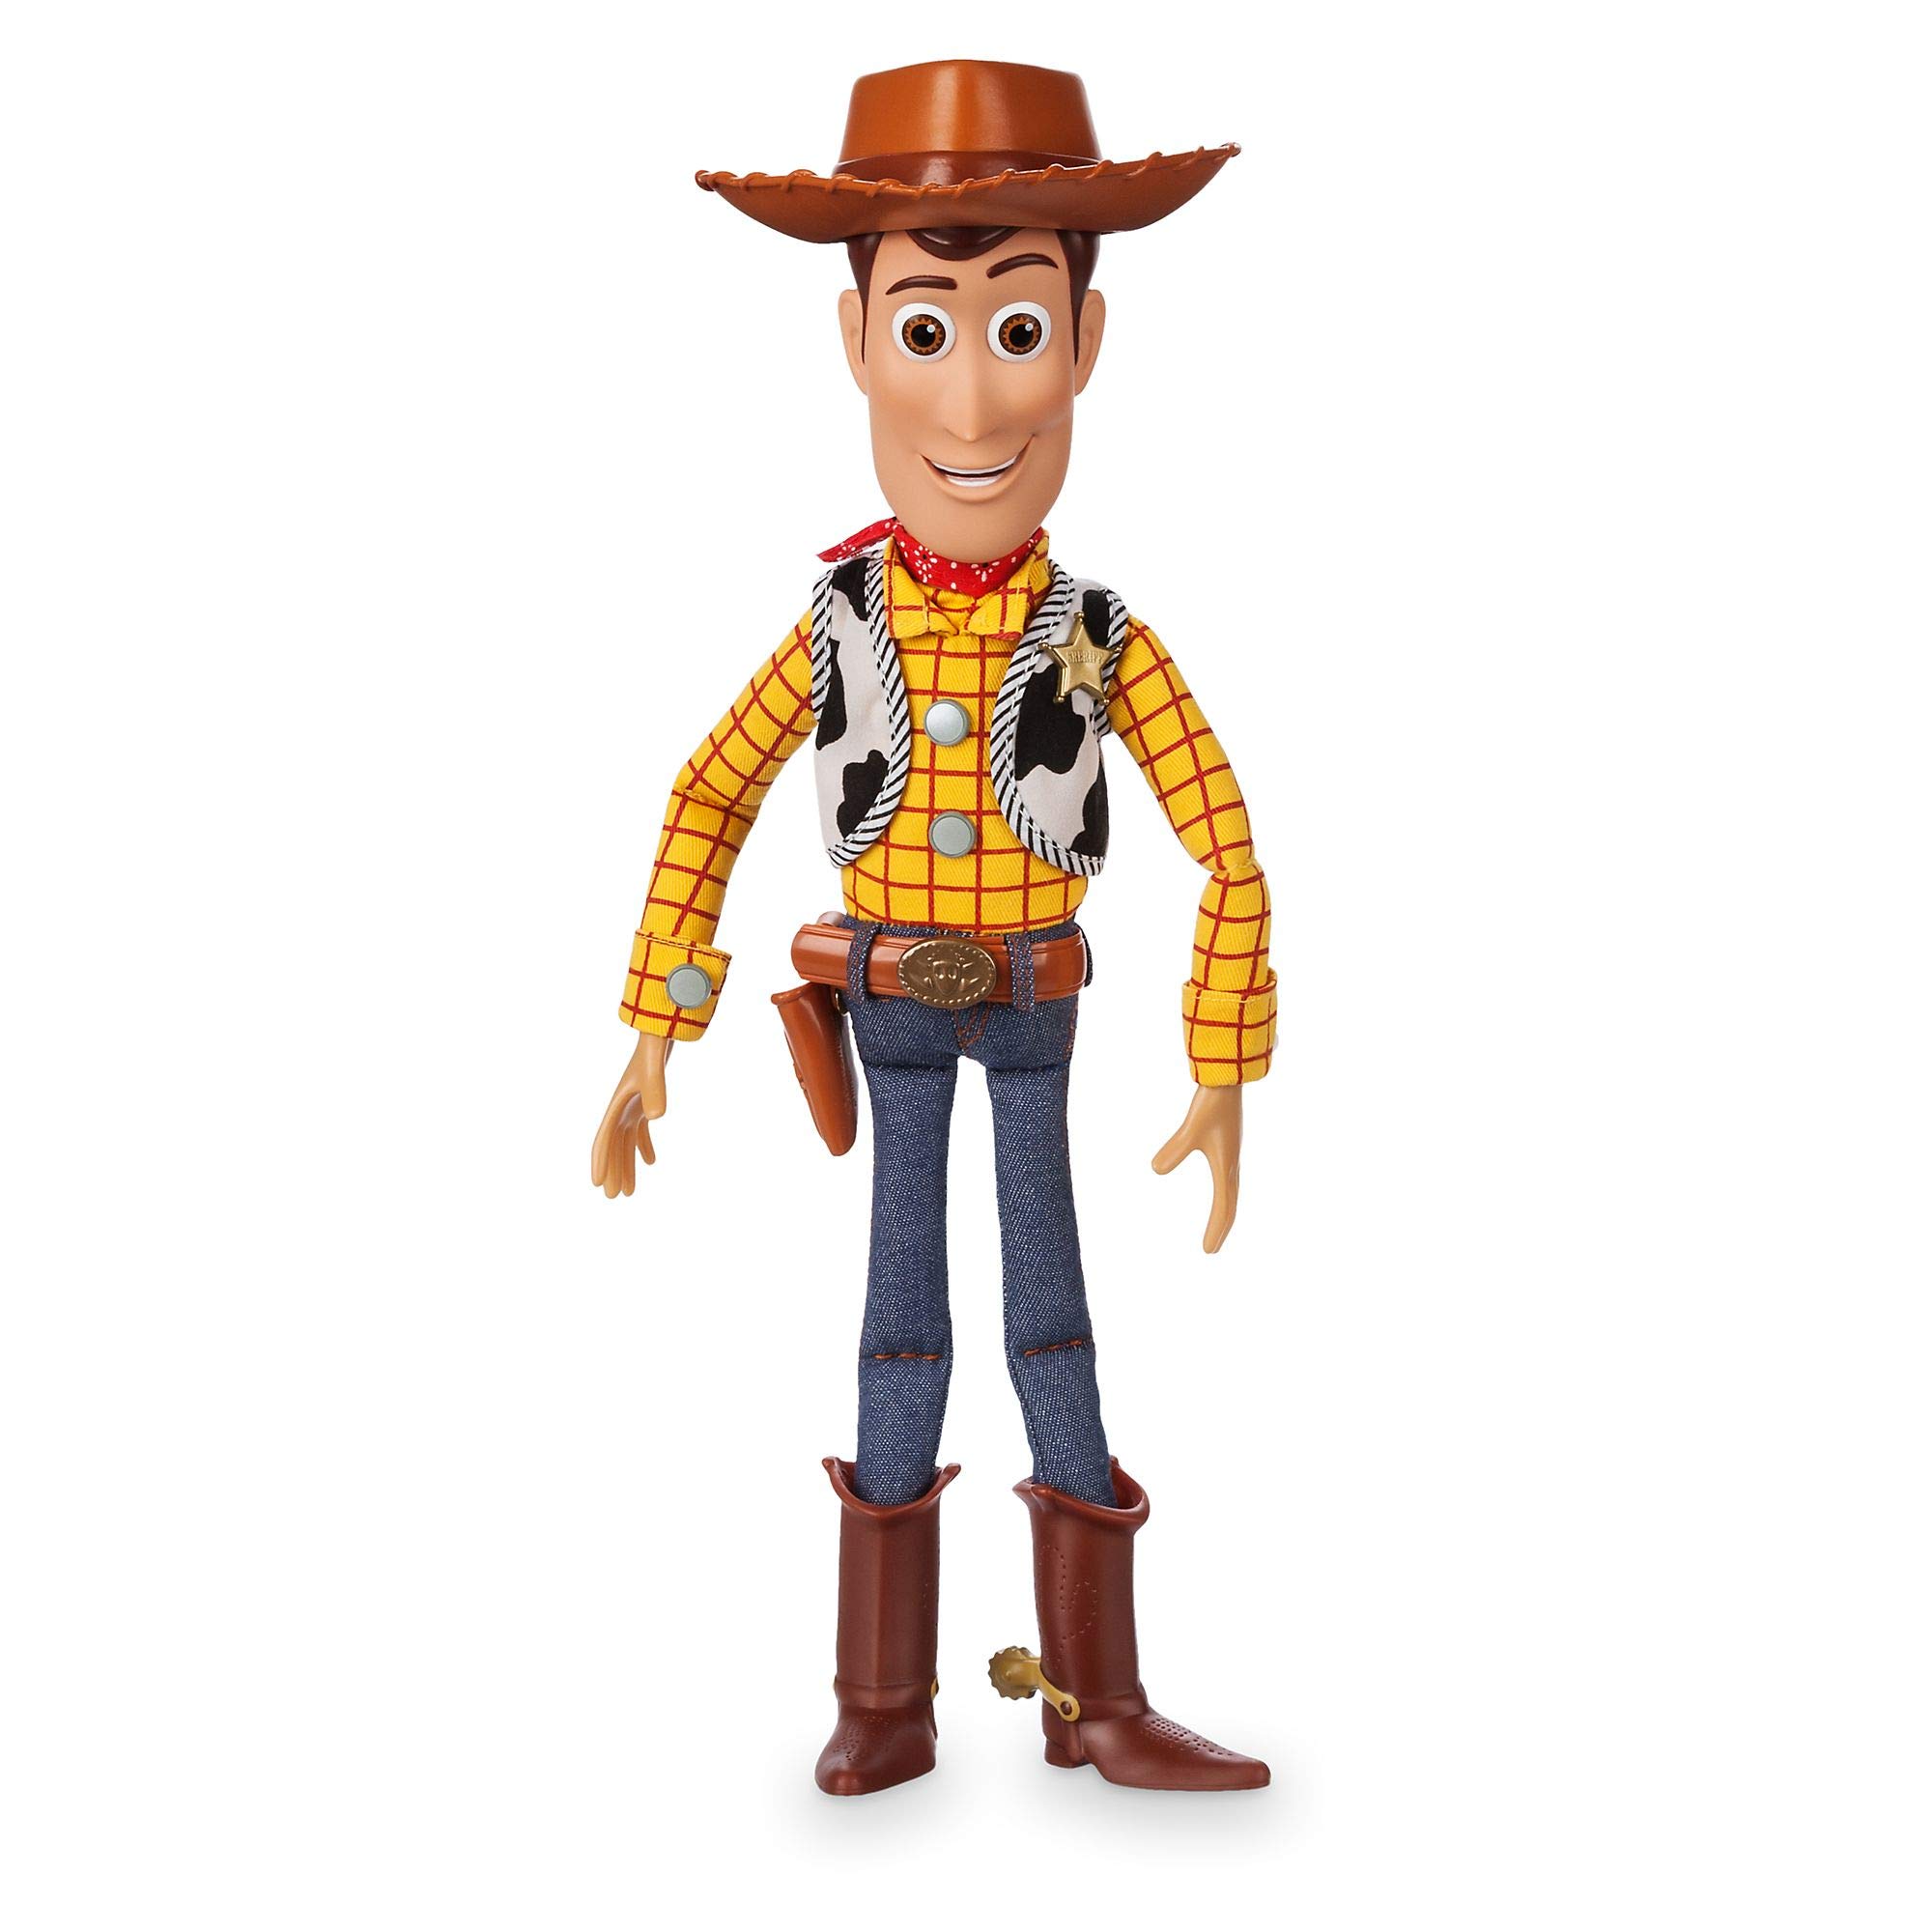 DISNEY Store Official Woody Interactive Talking Action Figure from Toy Story 4, 15 Inches, Features 10+ English Phrases, Interacts with Other Figures, Removable Hat, Ages 3+